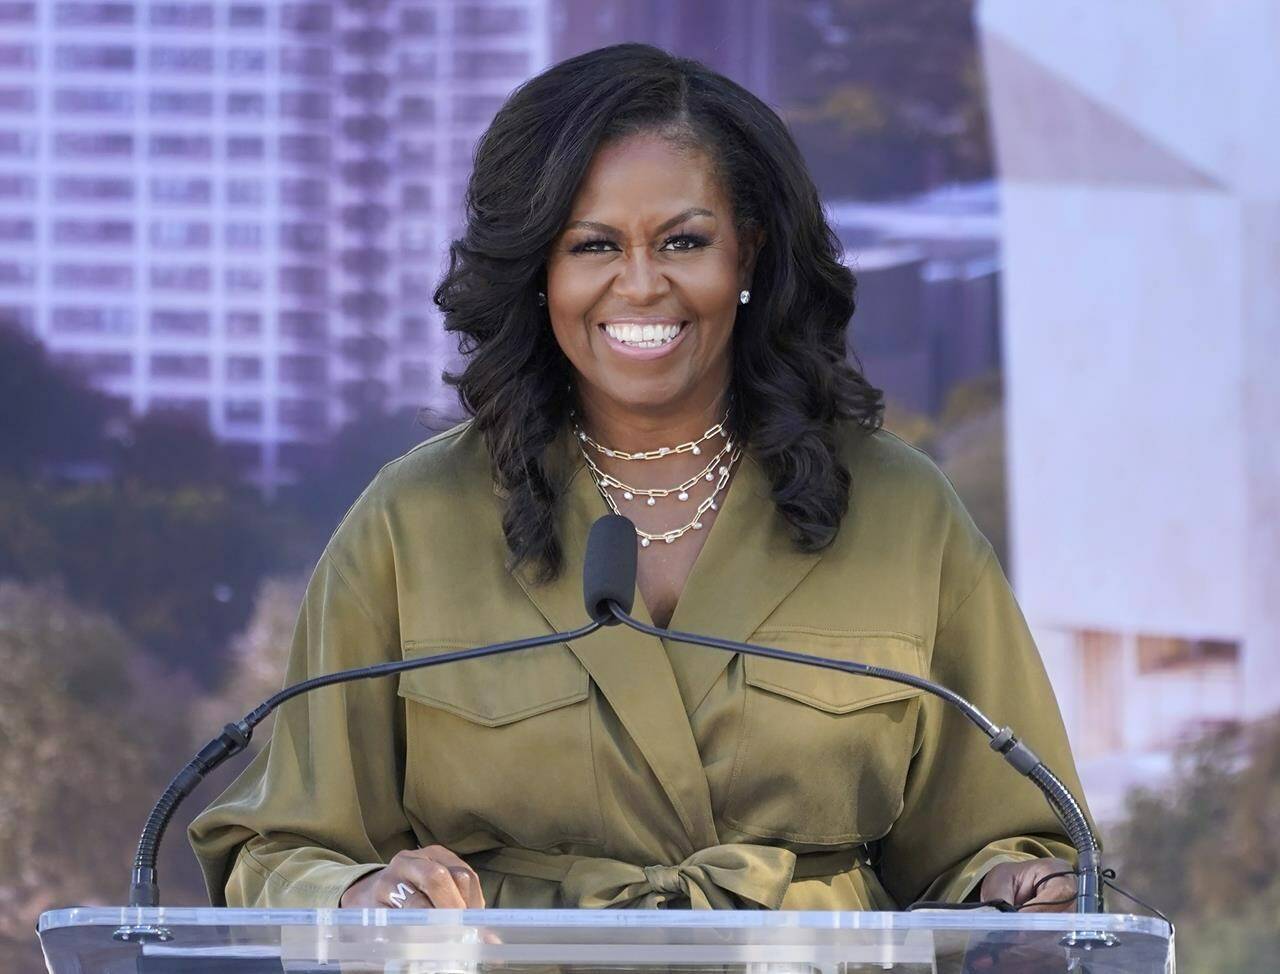 FILE - Former first lady Michelle Obamad smiles as she speaks during a groundbreaking ceremony for the Obama Presidential Center in Chicago on Sept. 28, 2021. Obama will narrate a new digital audio edition of Maurice Sendak’s children’s book “”Where the Wild Things Are.” HarperCollins Publishers announced Tuesday that the audio download will go on sale Oct. 31, the 60th anniversary of the book’s original release. (AP Photo/Charles Rex Arbogast, File)